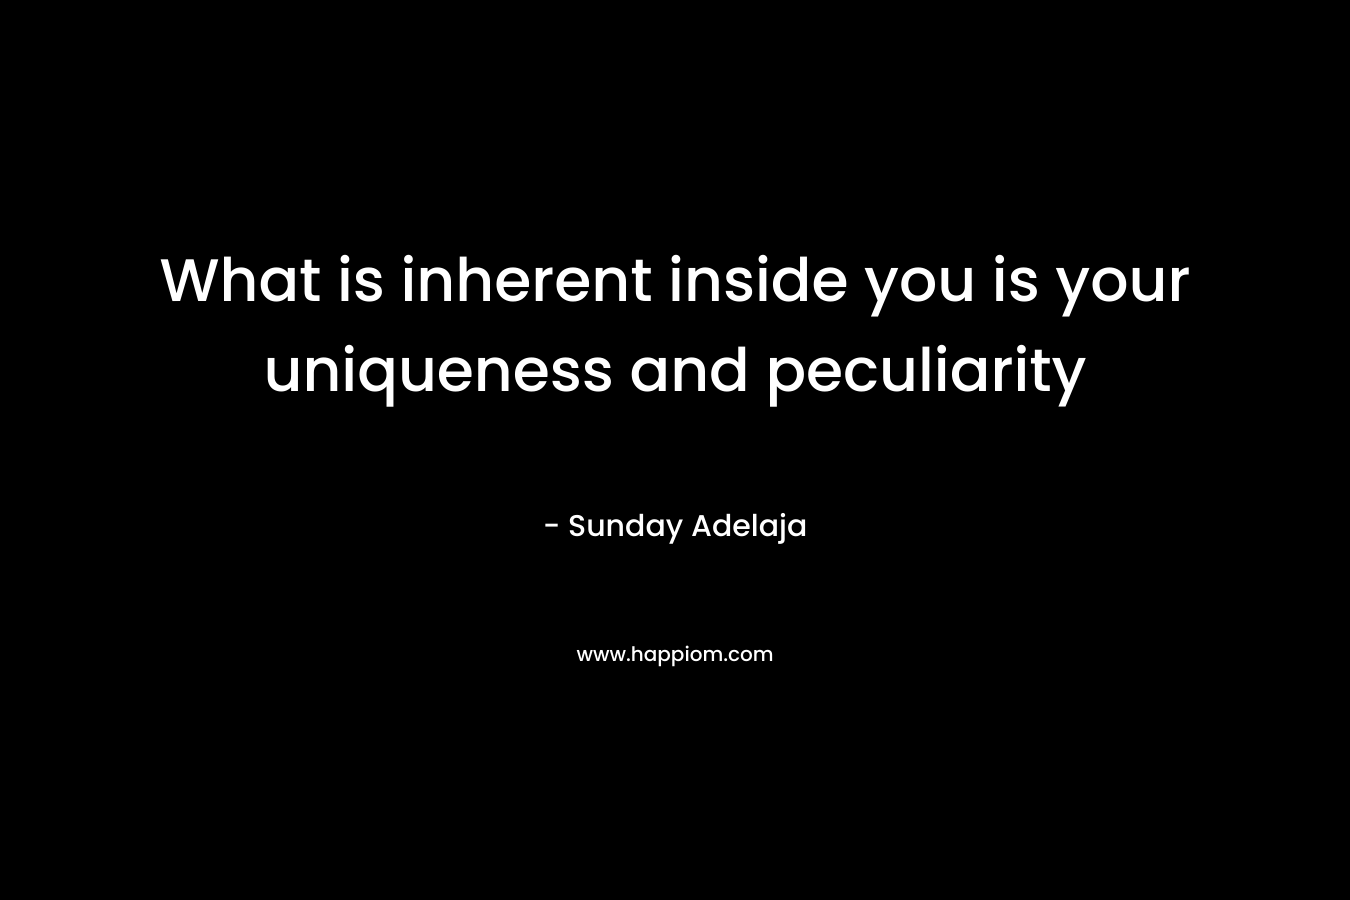 What is inherent inside you is your uniqueness and peculiarity